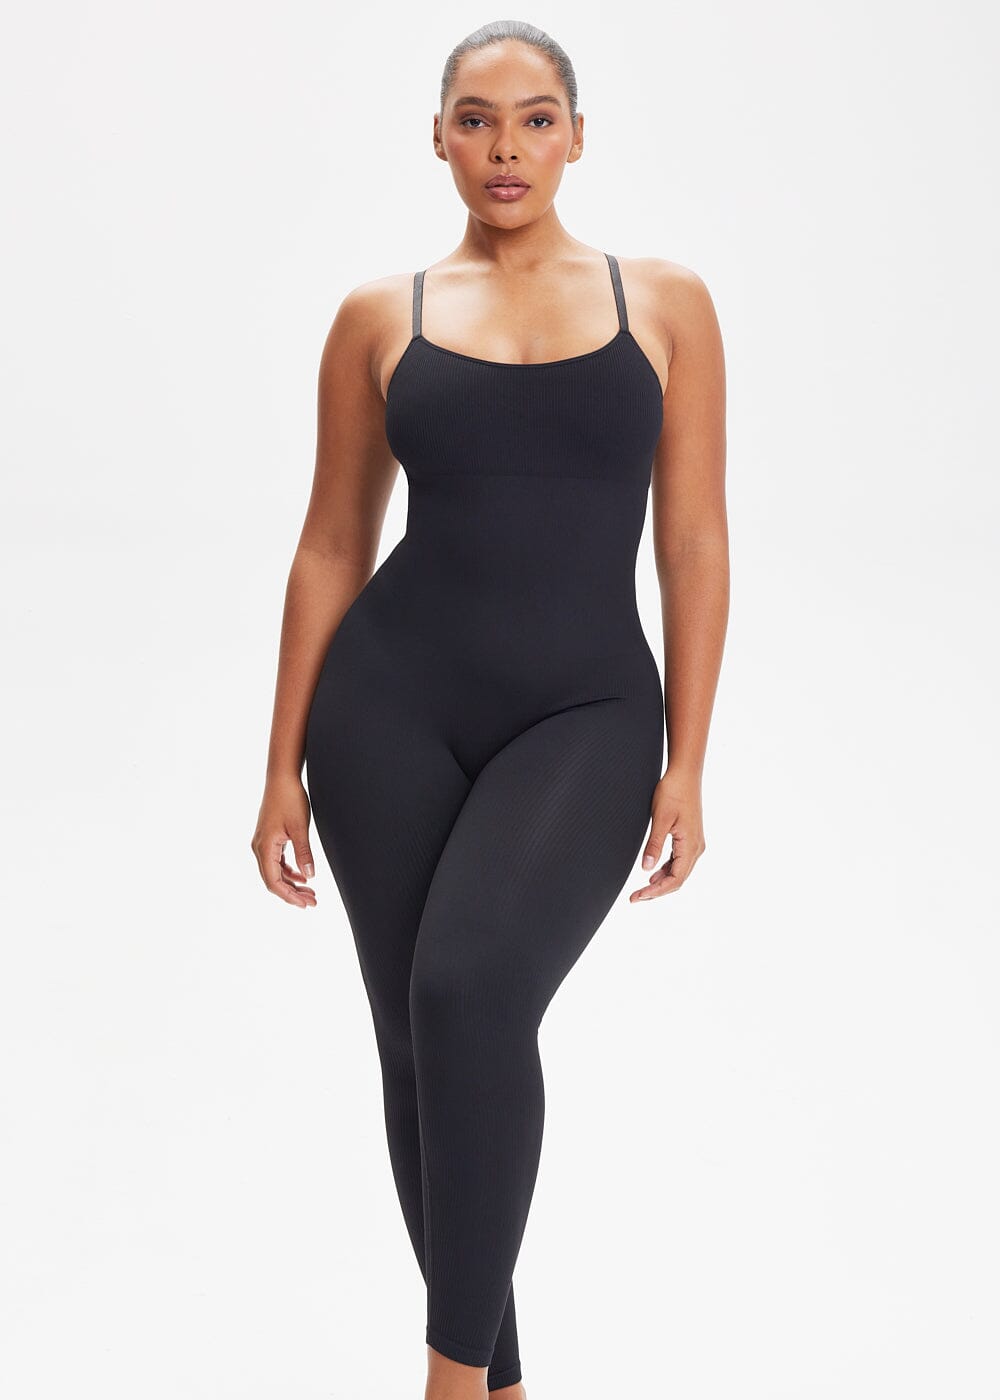 Plus-Size Woman Tries on New Skim's Cutout Romper and Looks Snatched in All  the Right Areas - Bellatory News